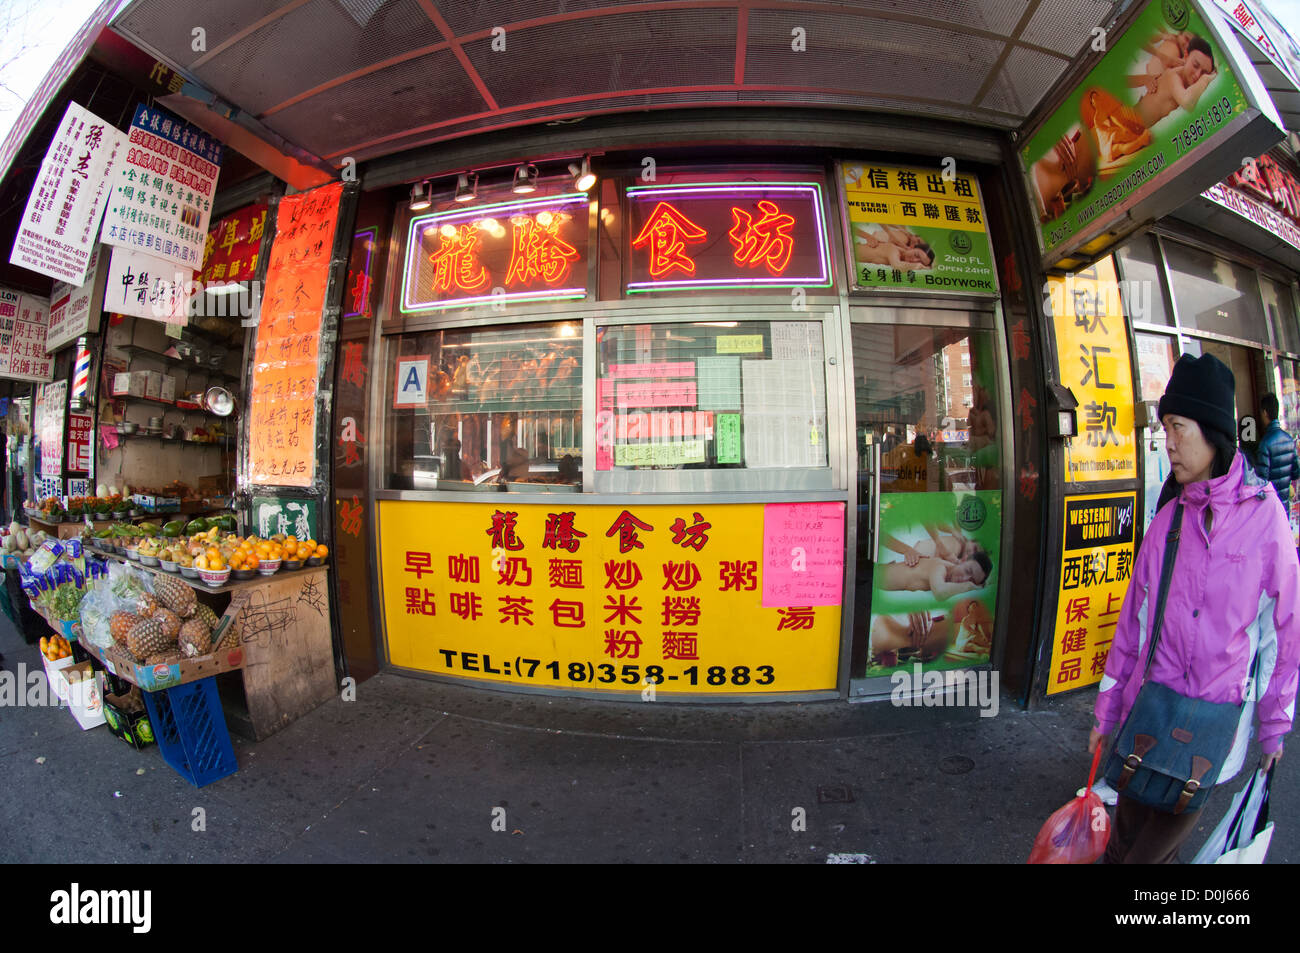 People shopping in the Chinese neighborhood of Flushing, Queens in New York Stock Photo